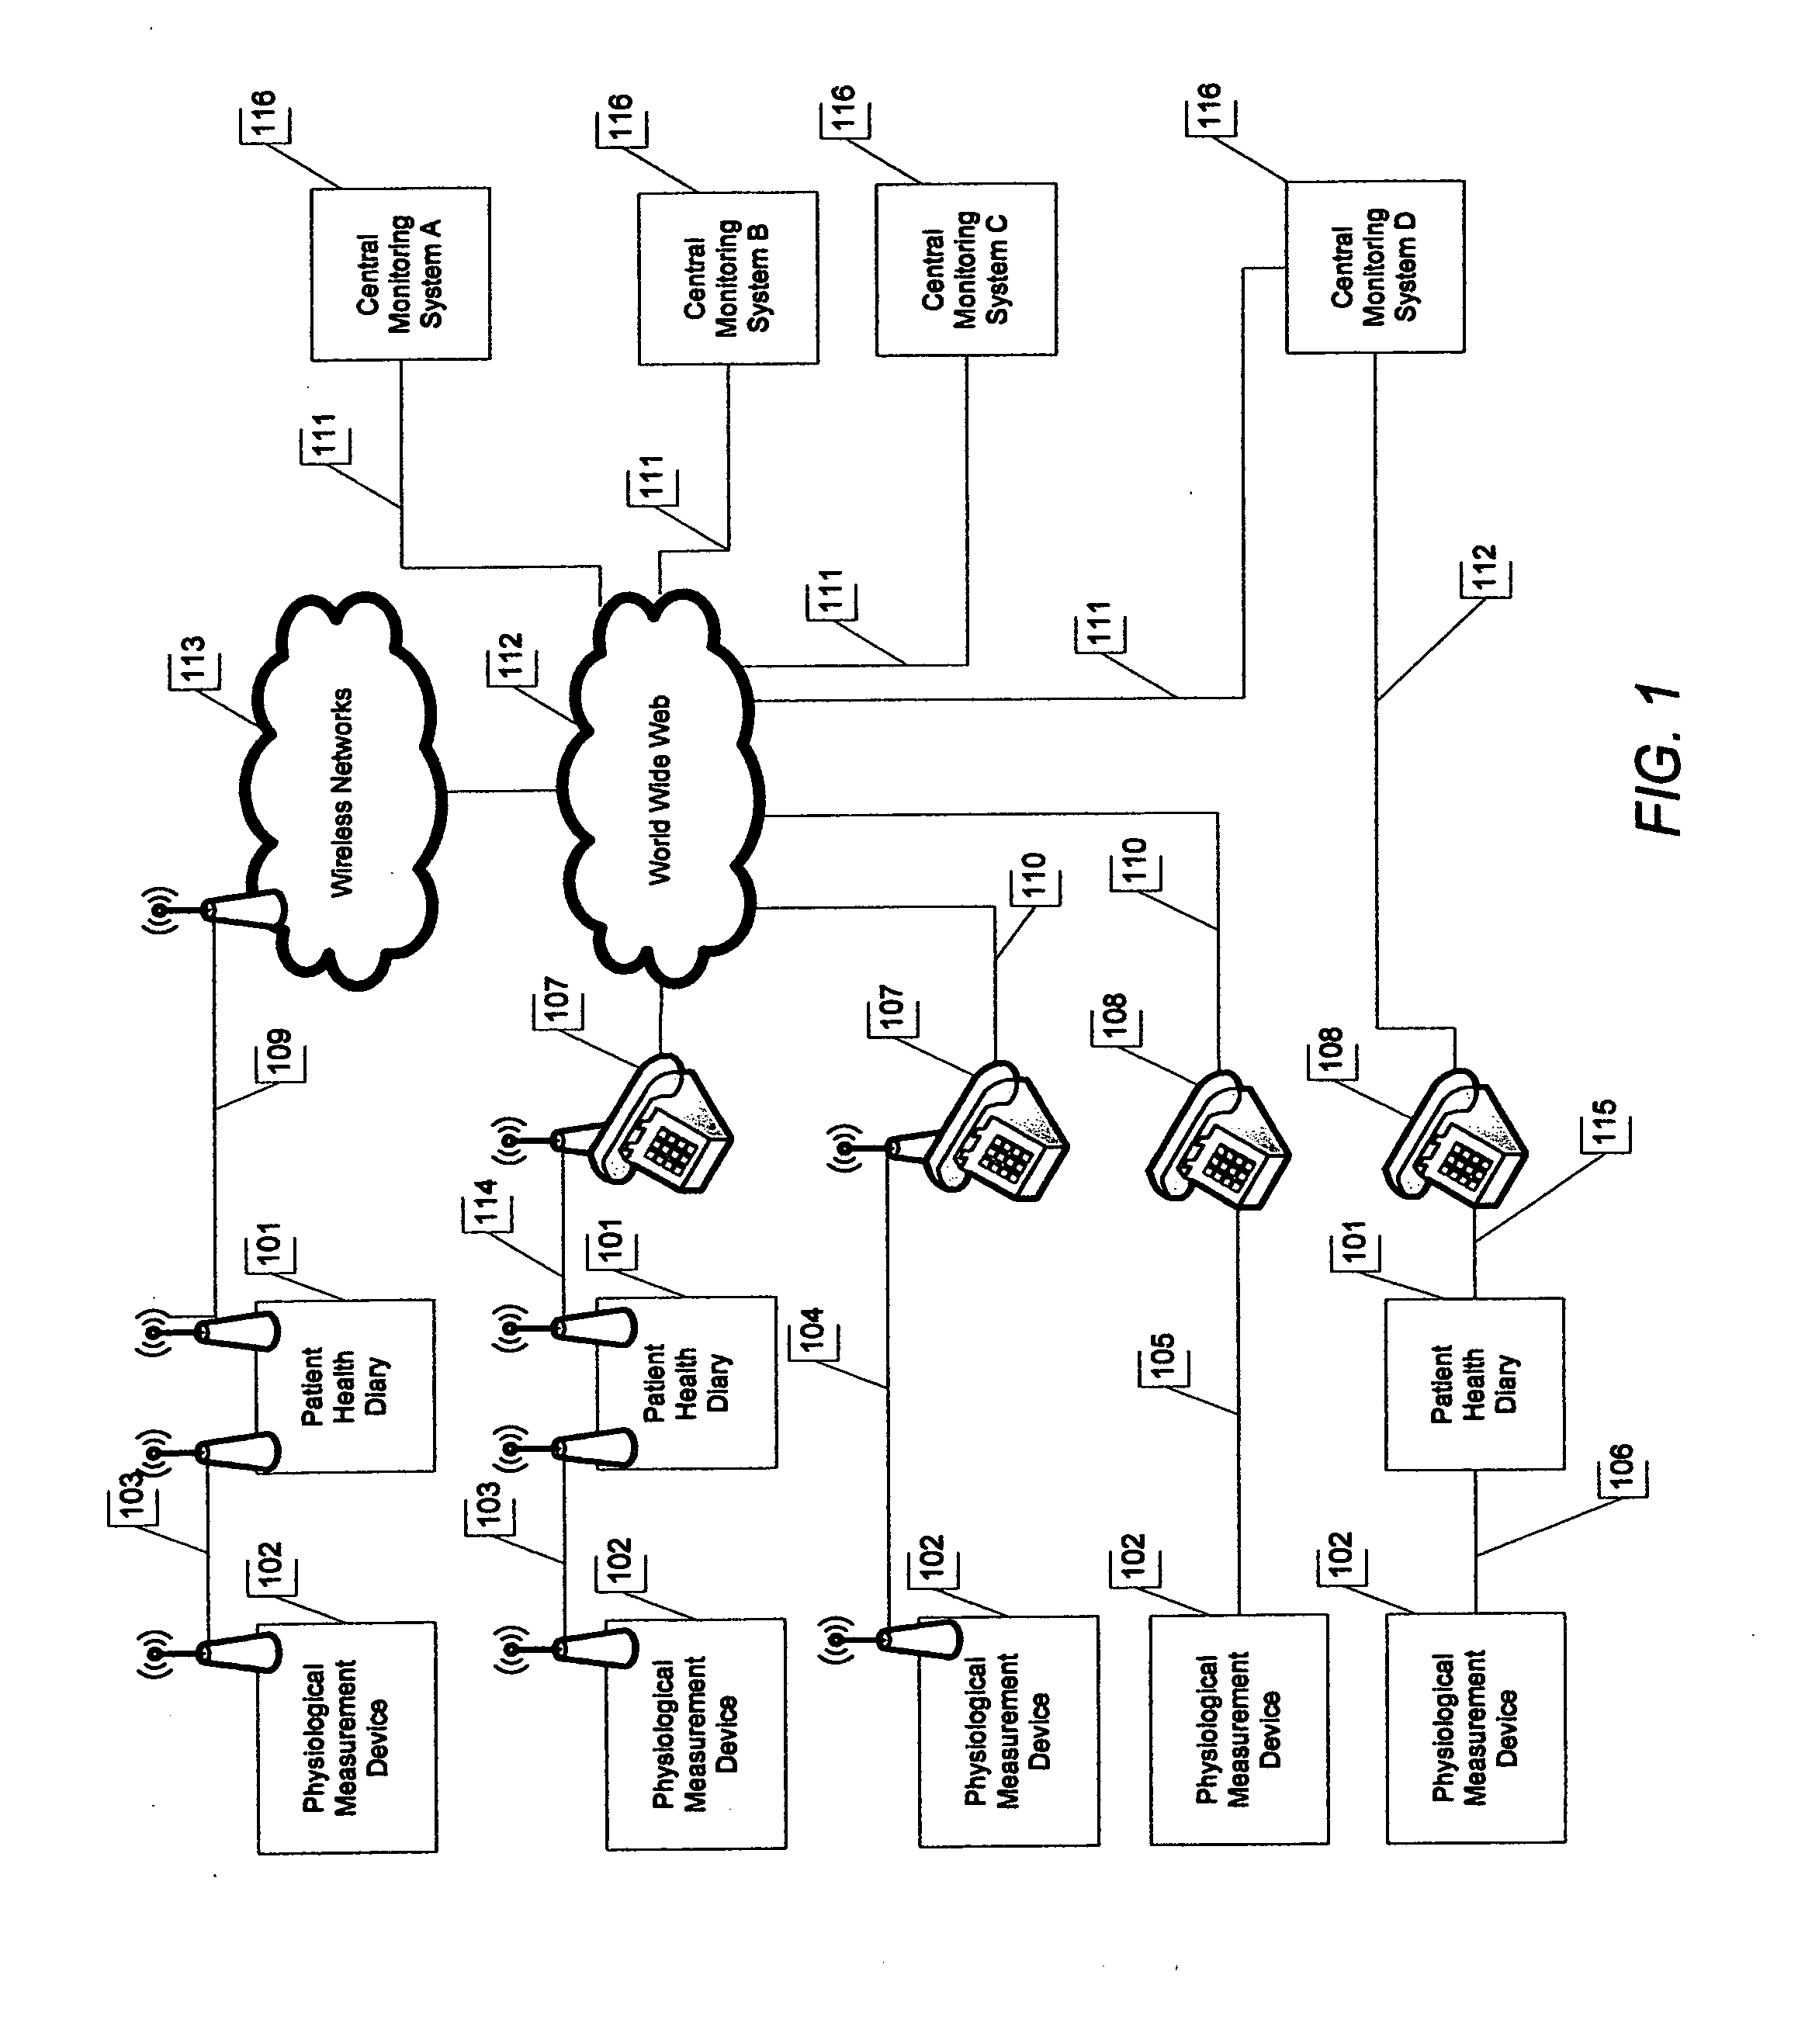 Method and apparatus for administering and monitoring patient treatment